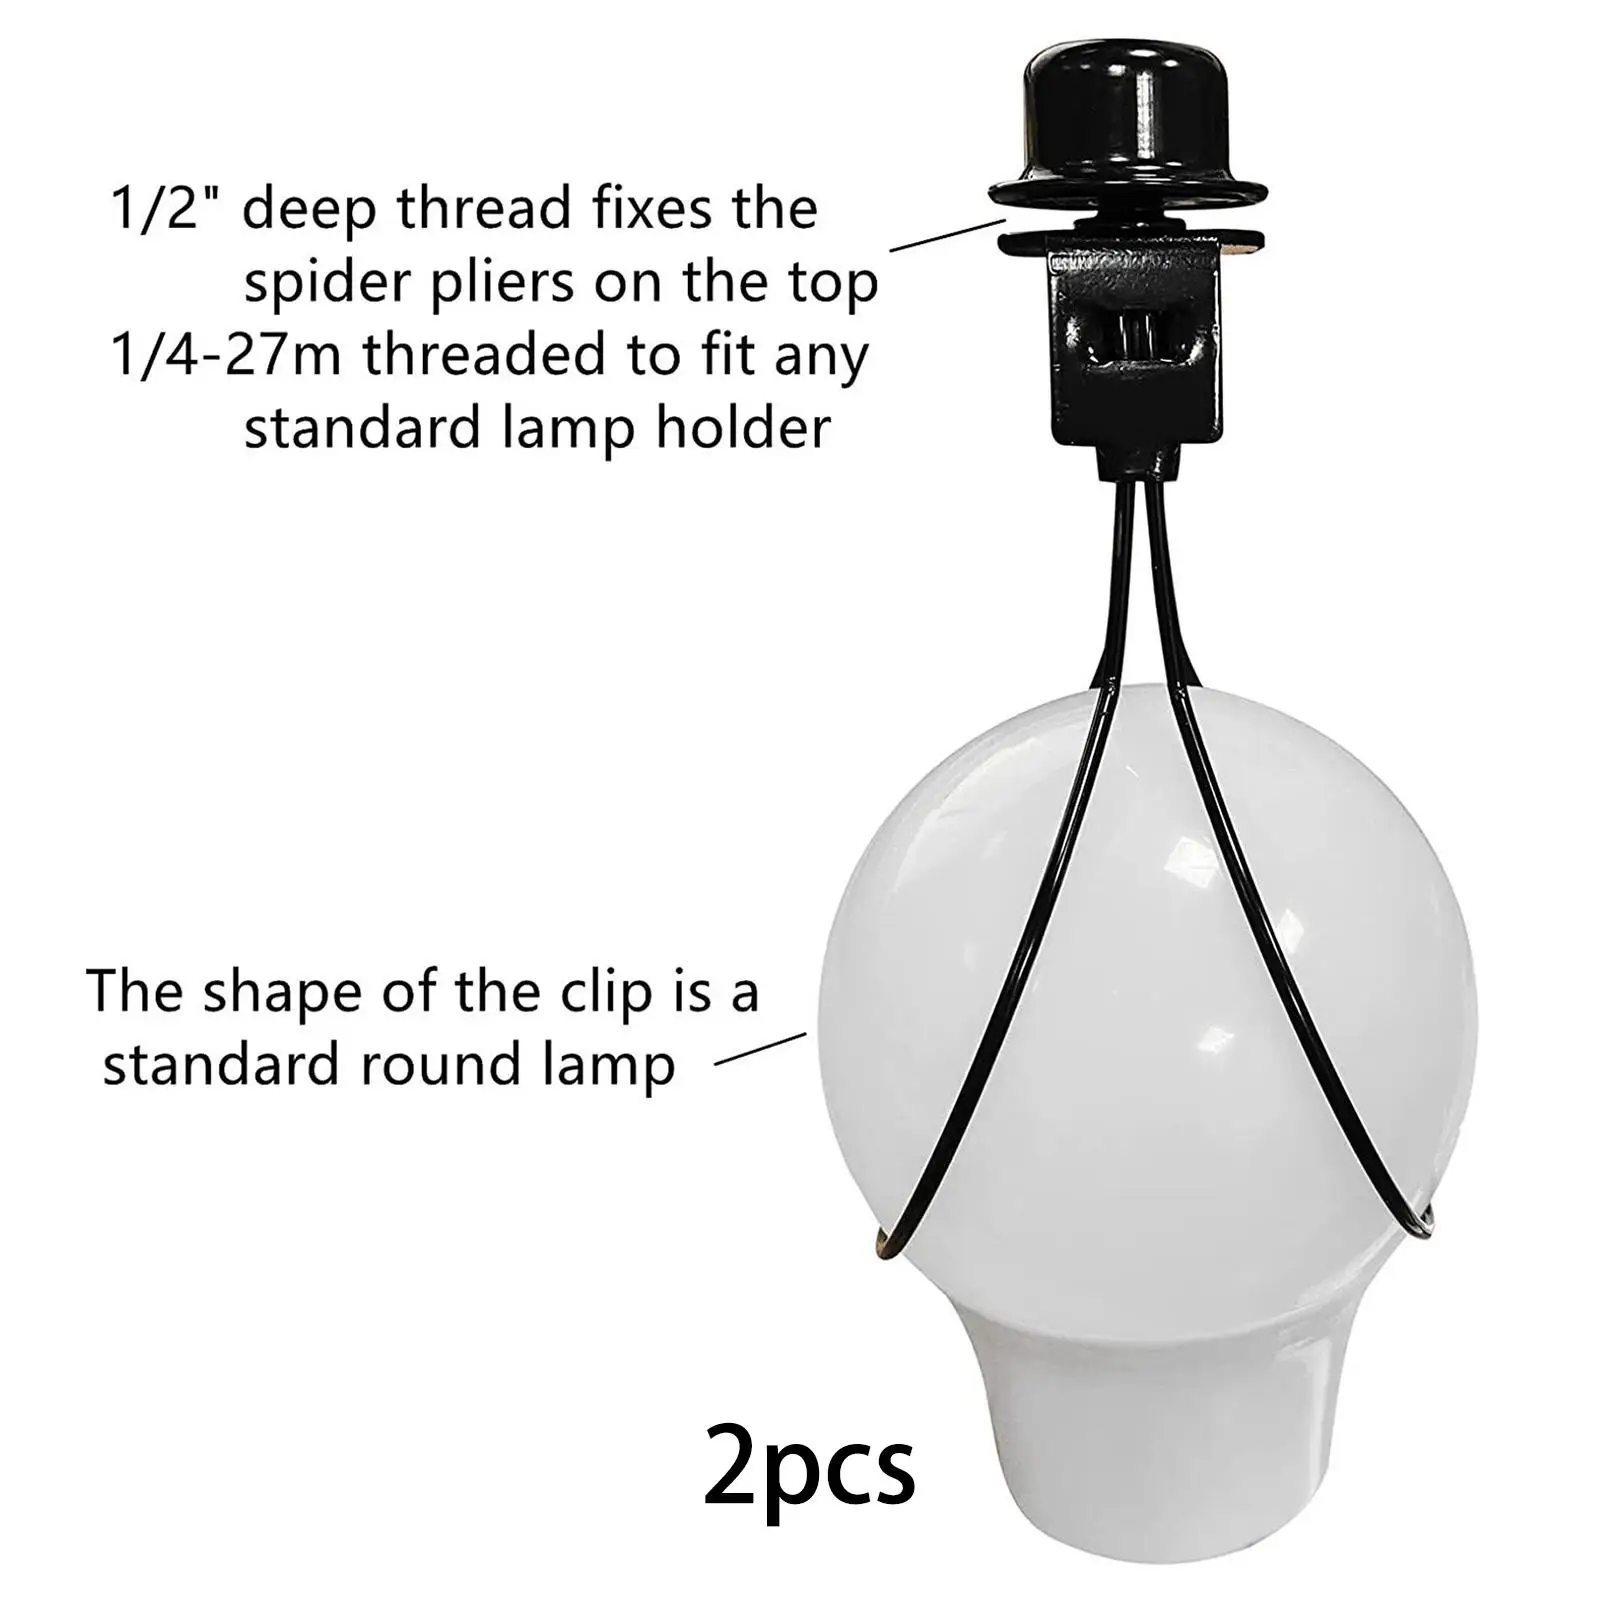 Iron Lamp Shade Lights Bulb Clip Adapter with Shade Attaching Finial Top Converter for/Floor Light Ceiling Light Lighting